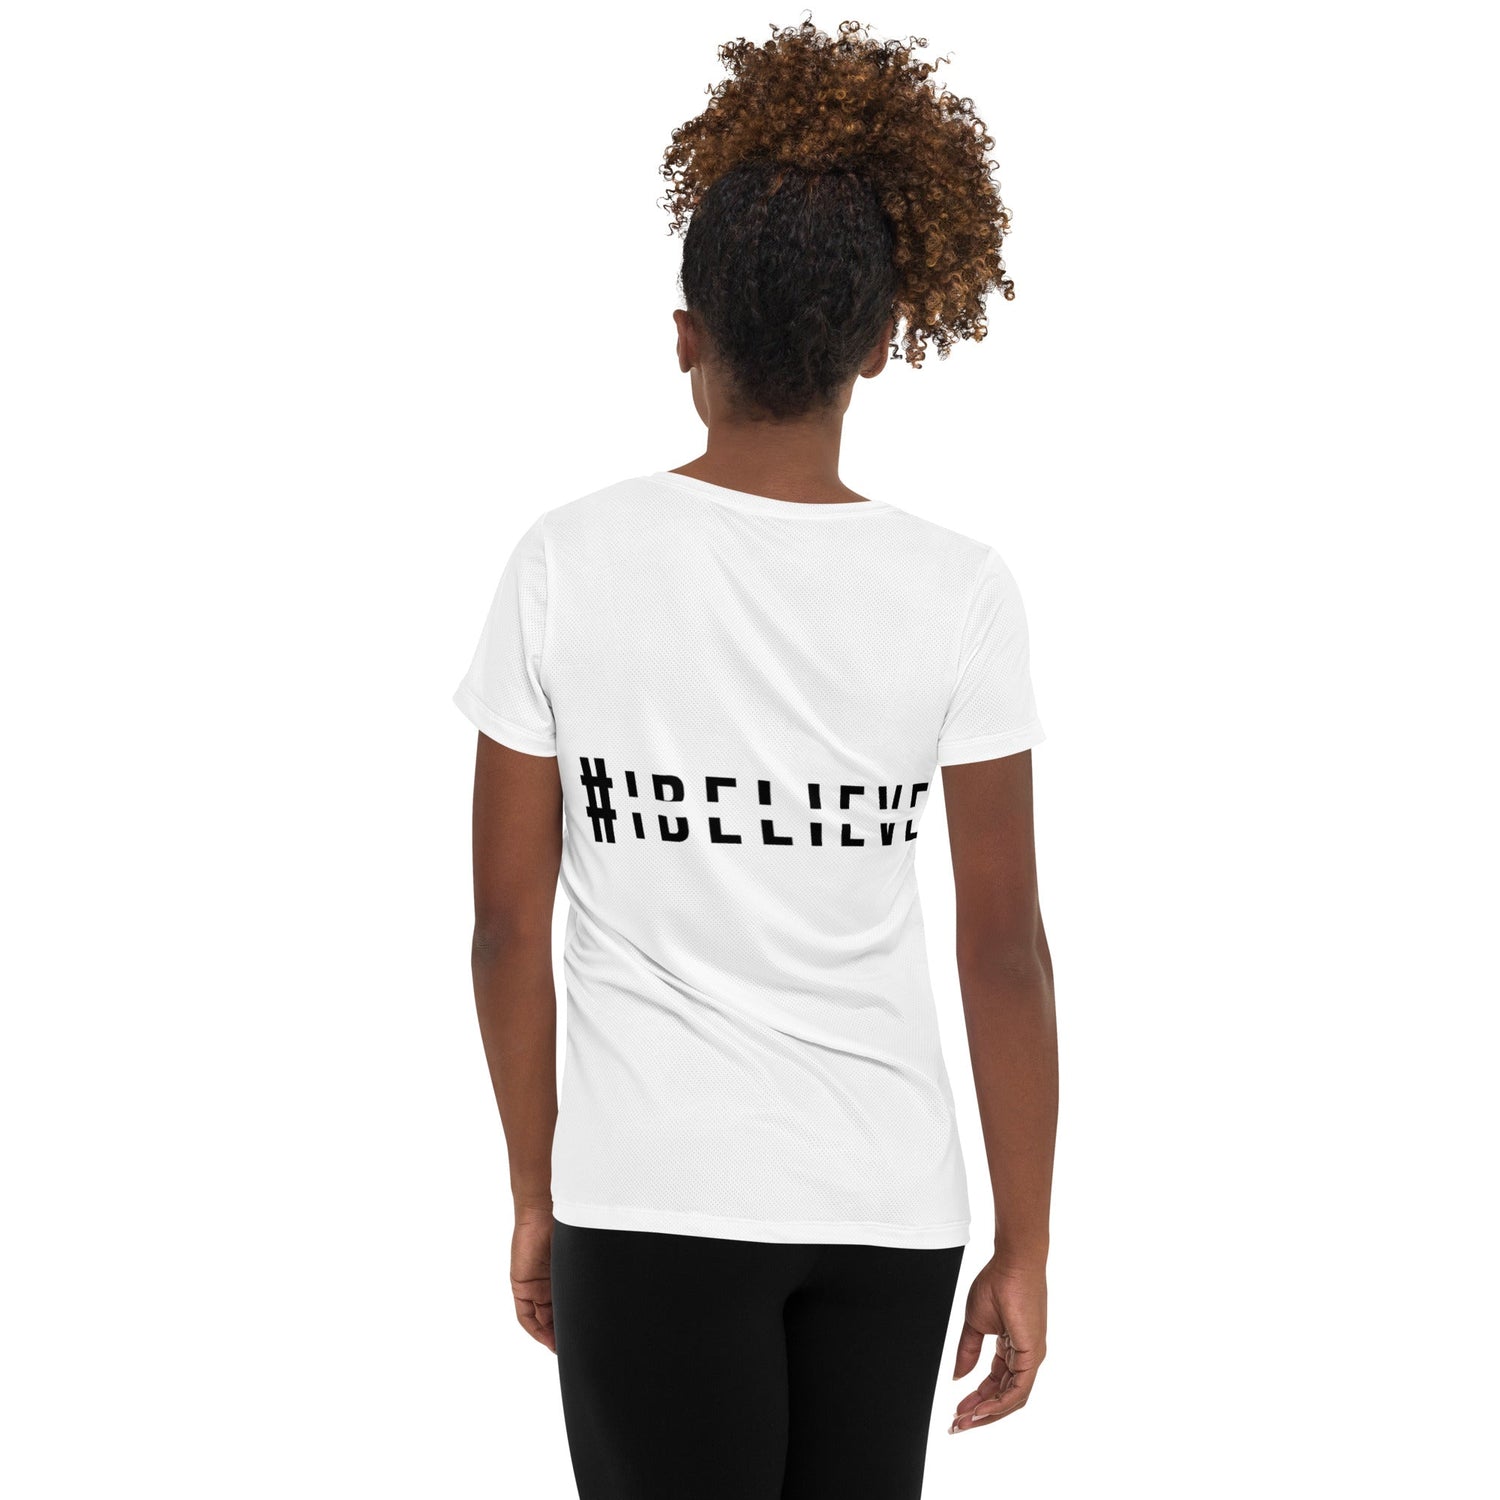 Girl in the Beauty Salon All-Over Print Women's Athletic T-shirt-Wear What Inspires You